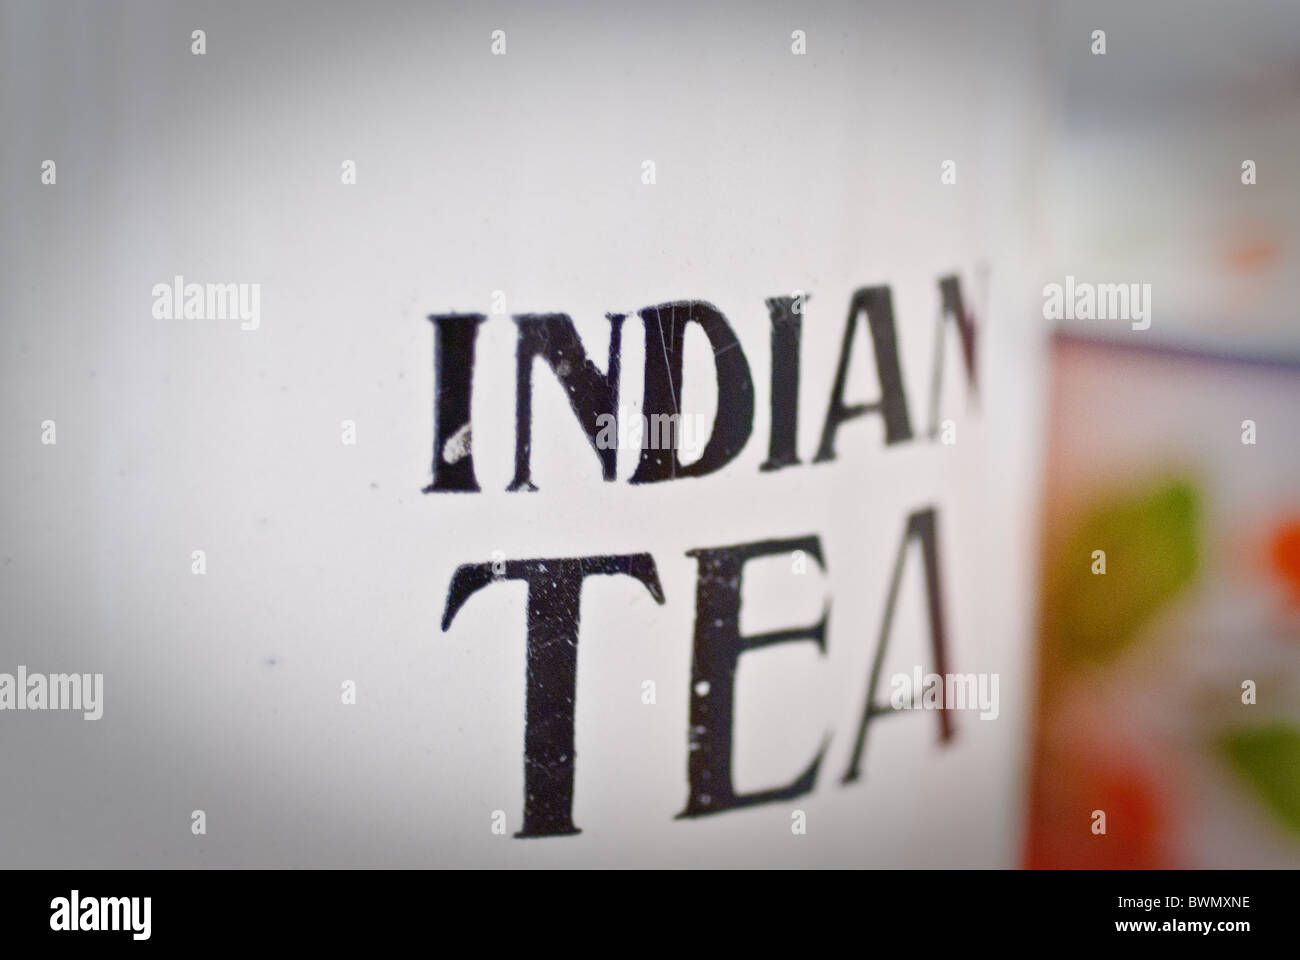 Indian Tea container Stock Photo